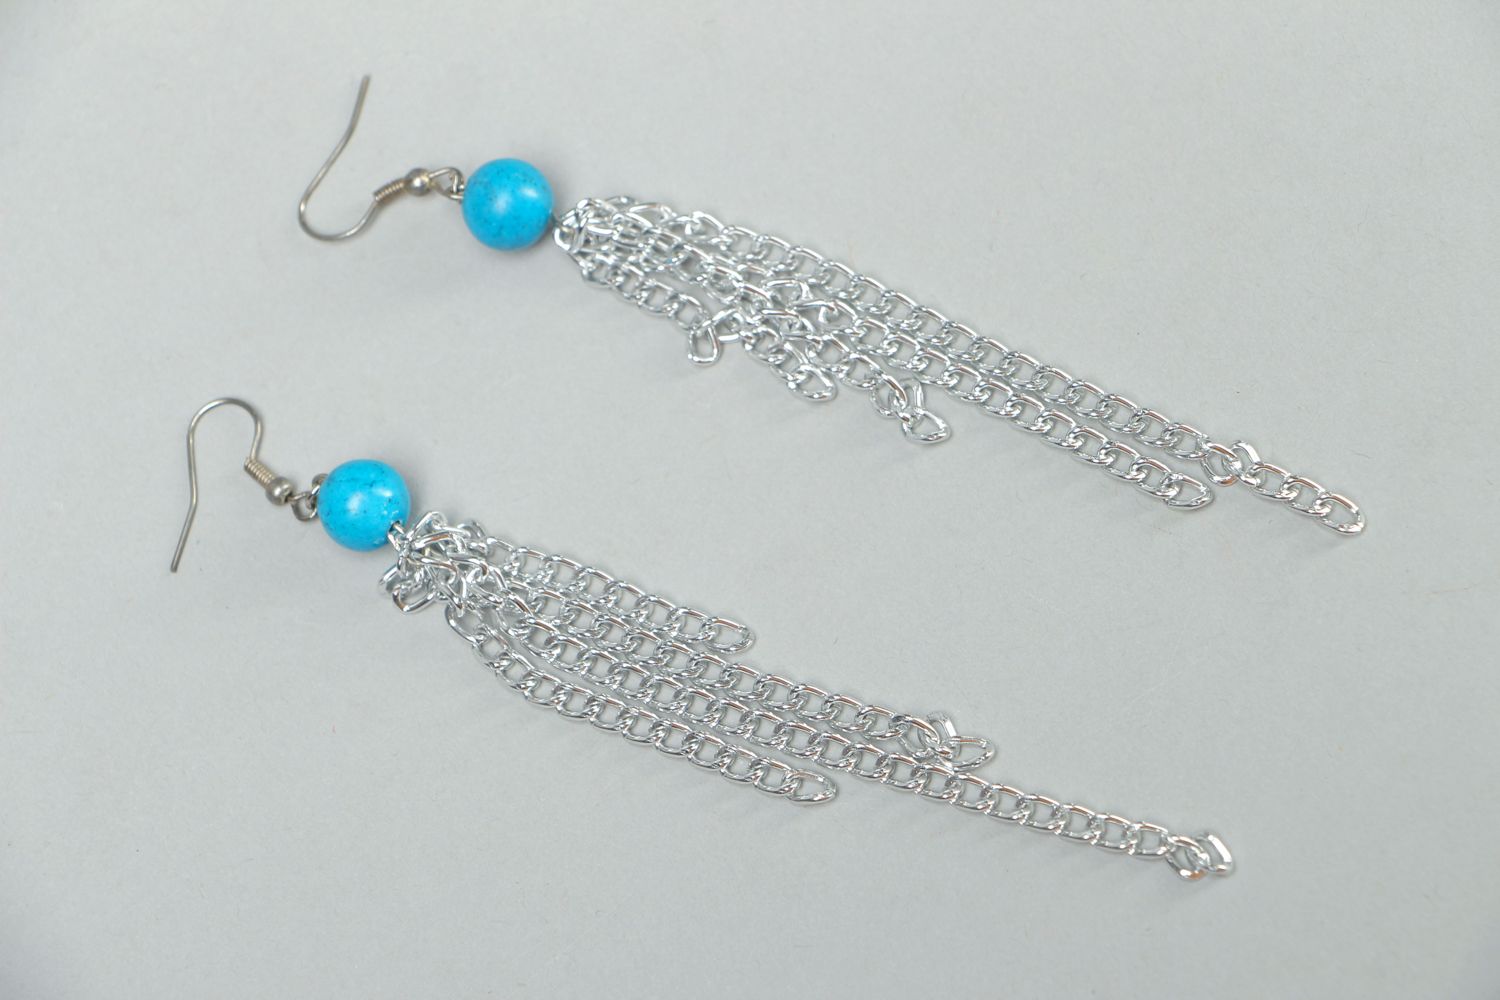 Metal earrings with chains and beads photo 1